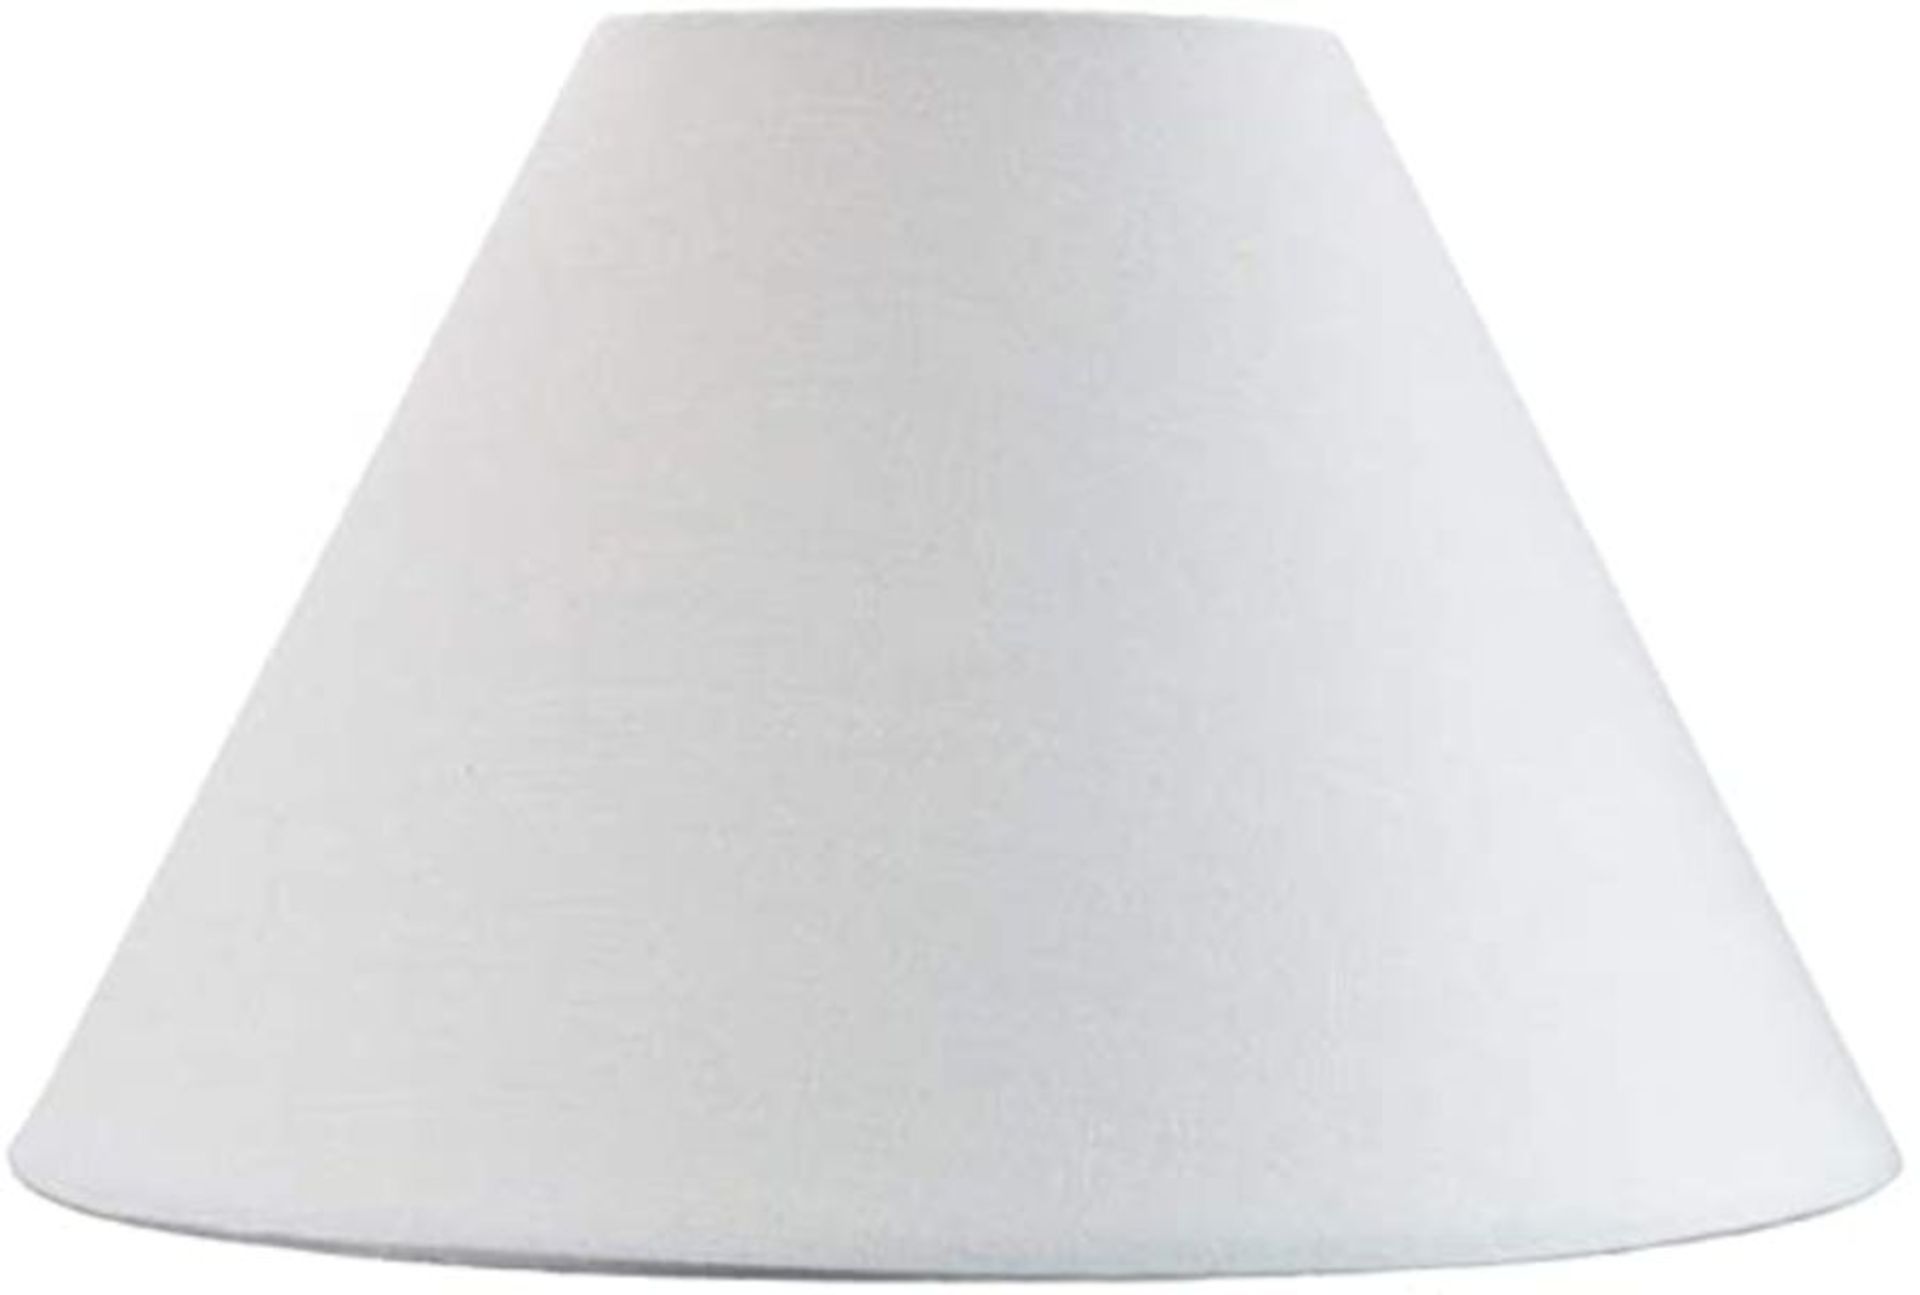 Traditional 10" White Cotton Coolie Lampshade Suitable for Table Lamp or Pendant by Happy - Image 2 of 2